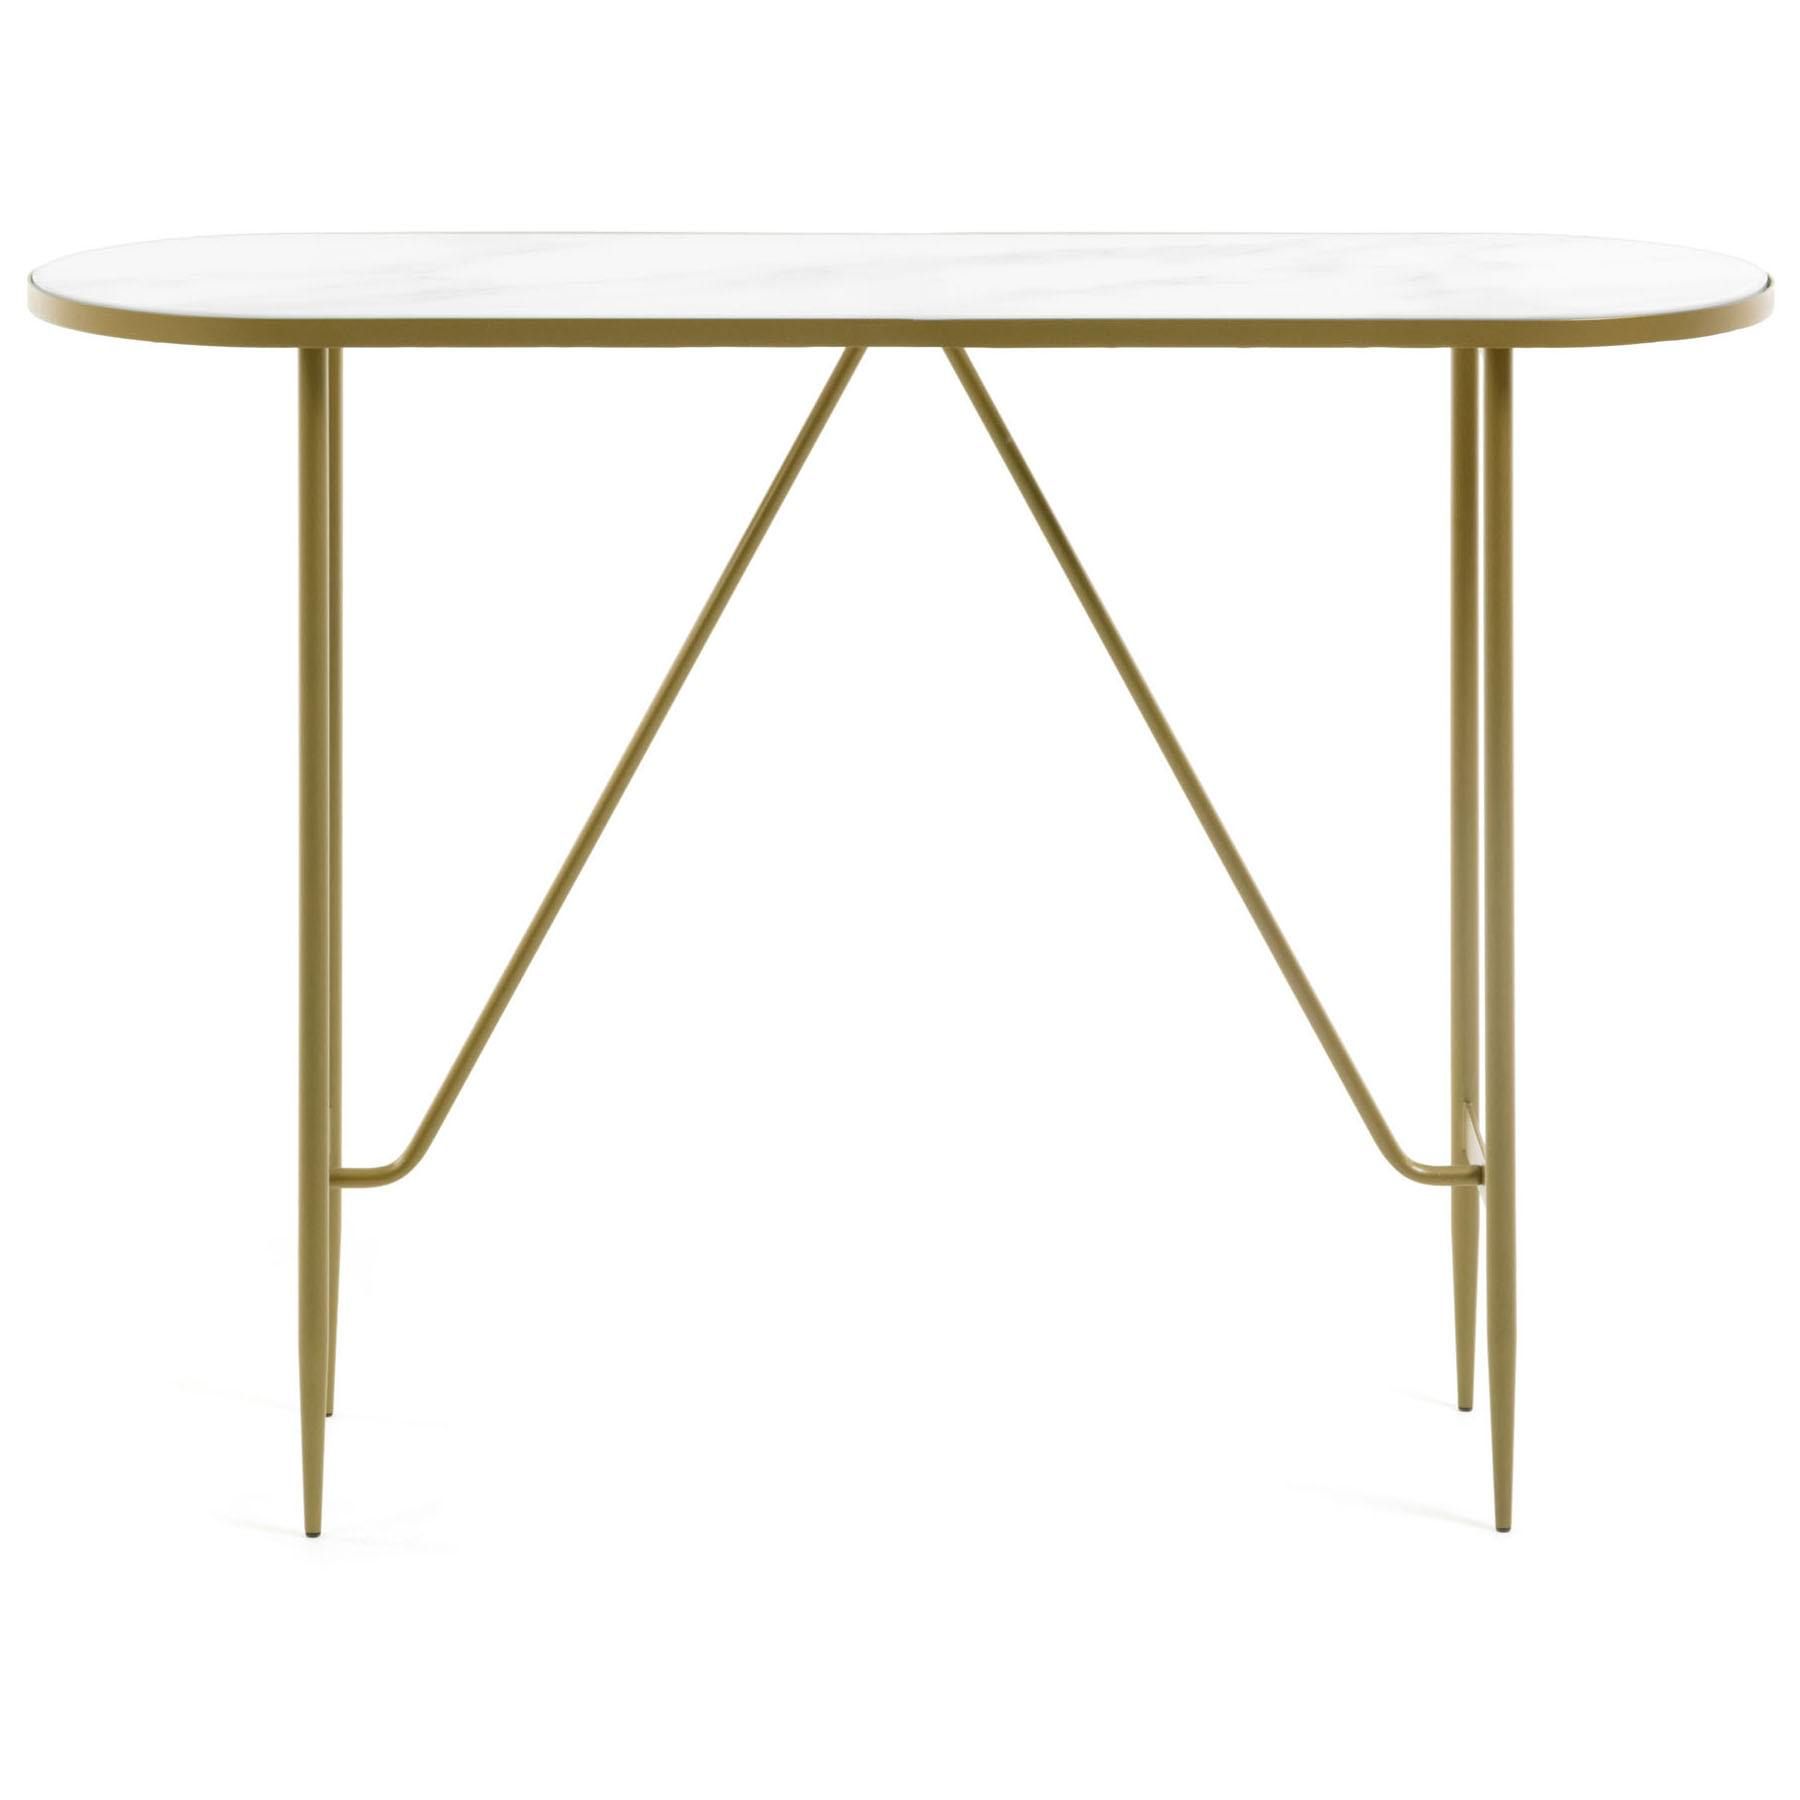 Cara Glass Top Metal Oval Console Table, 110cm With Regard To Glass And Gold Oval Console Tables (View 19 of 20)